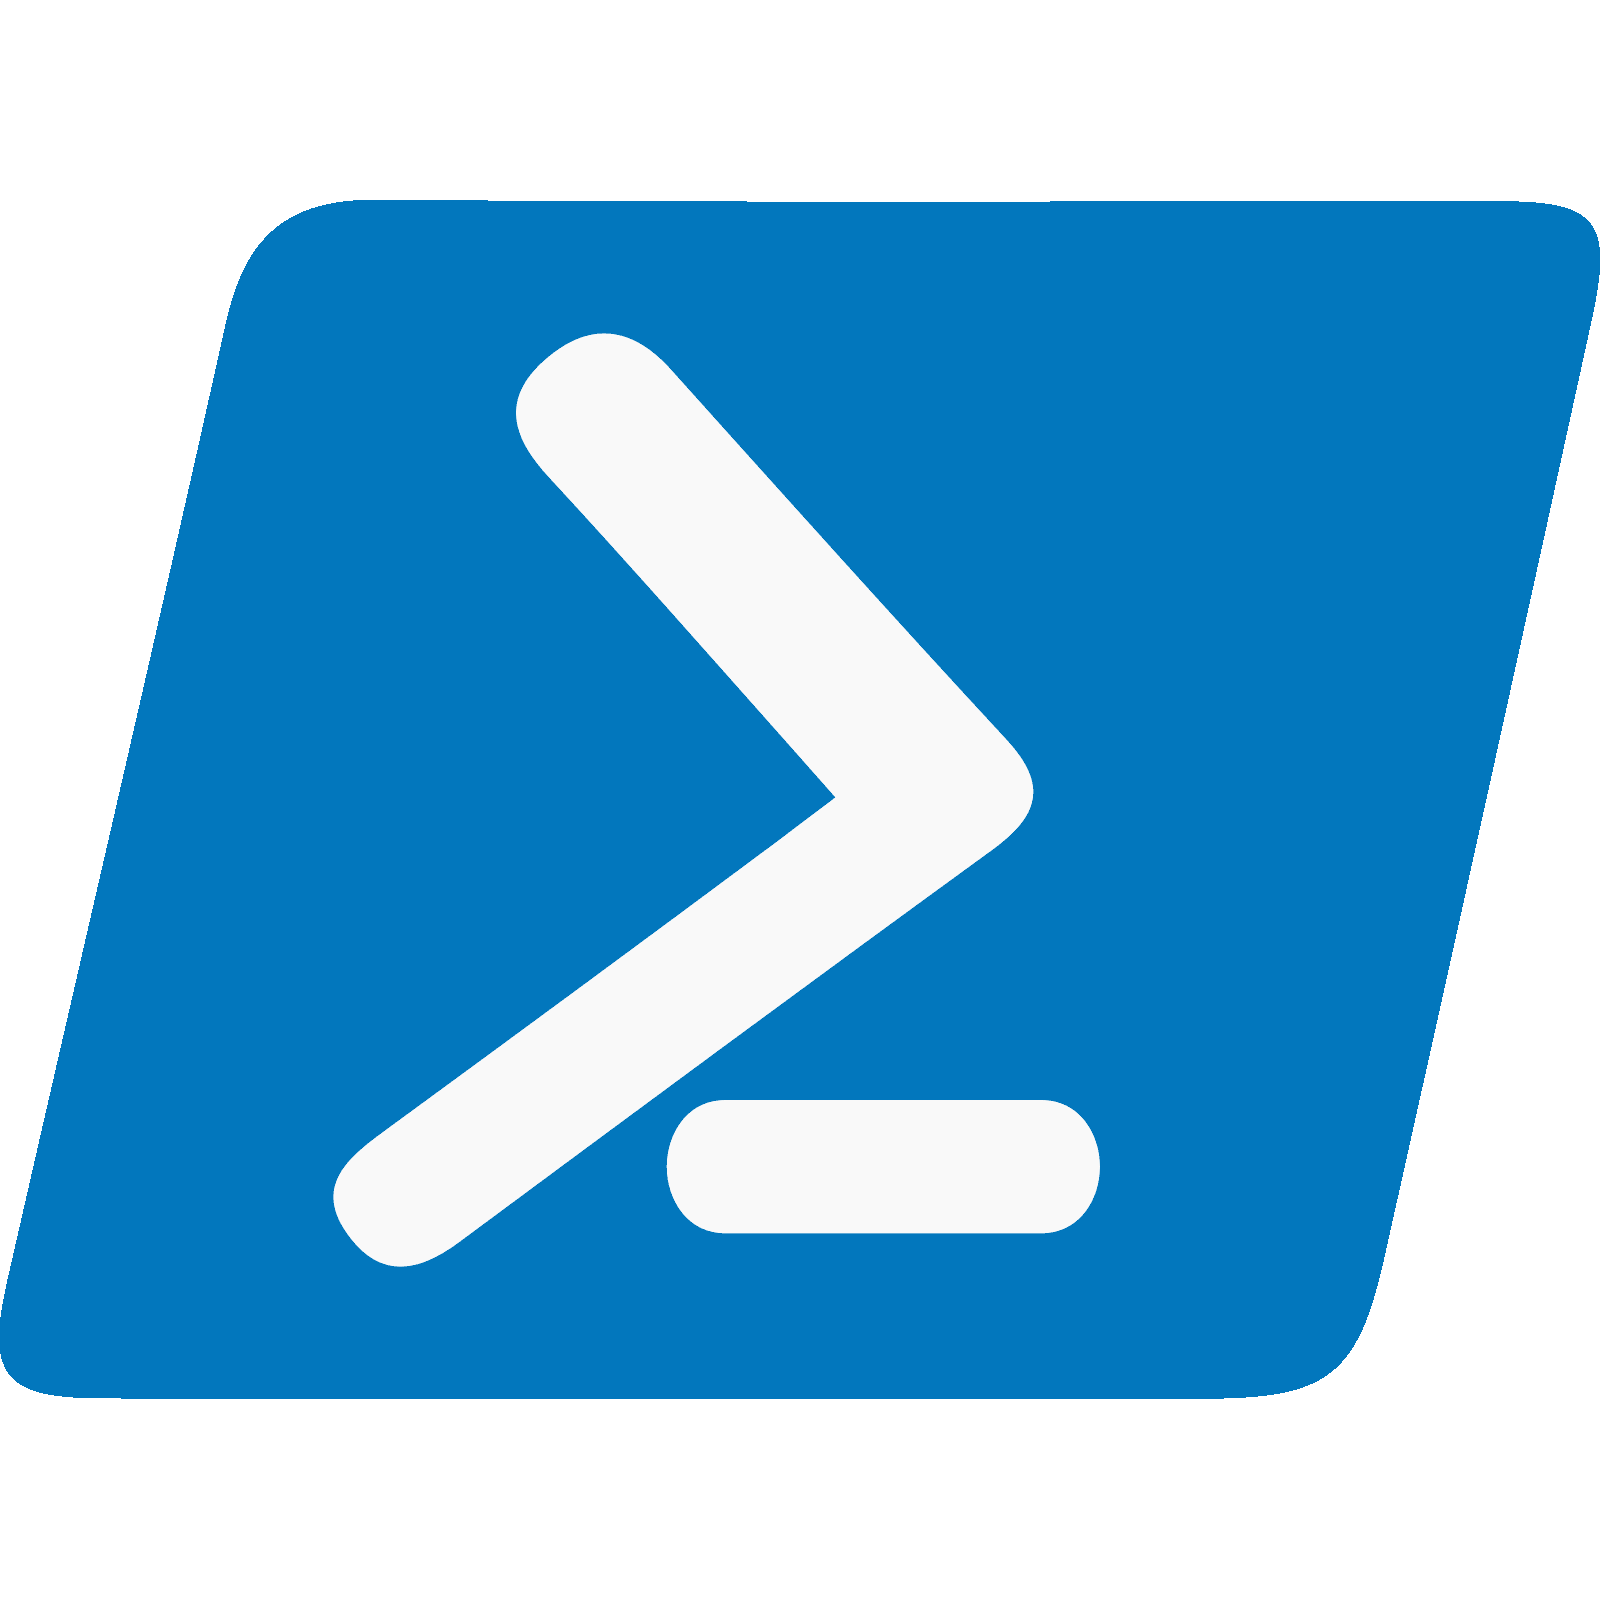 Manage Azure Cosmos DB with PowerShell | Azure Cosmos DB Blog